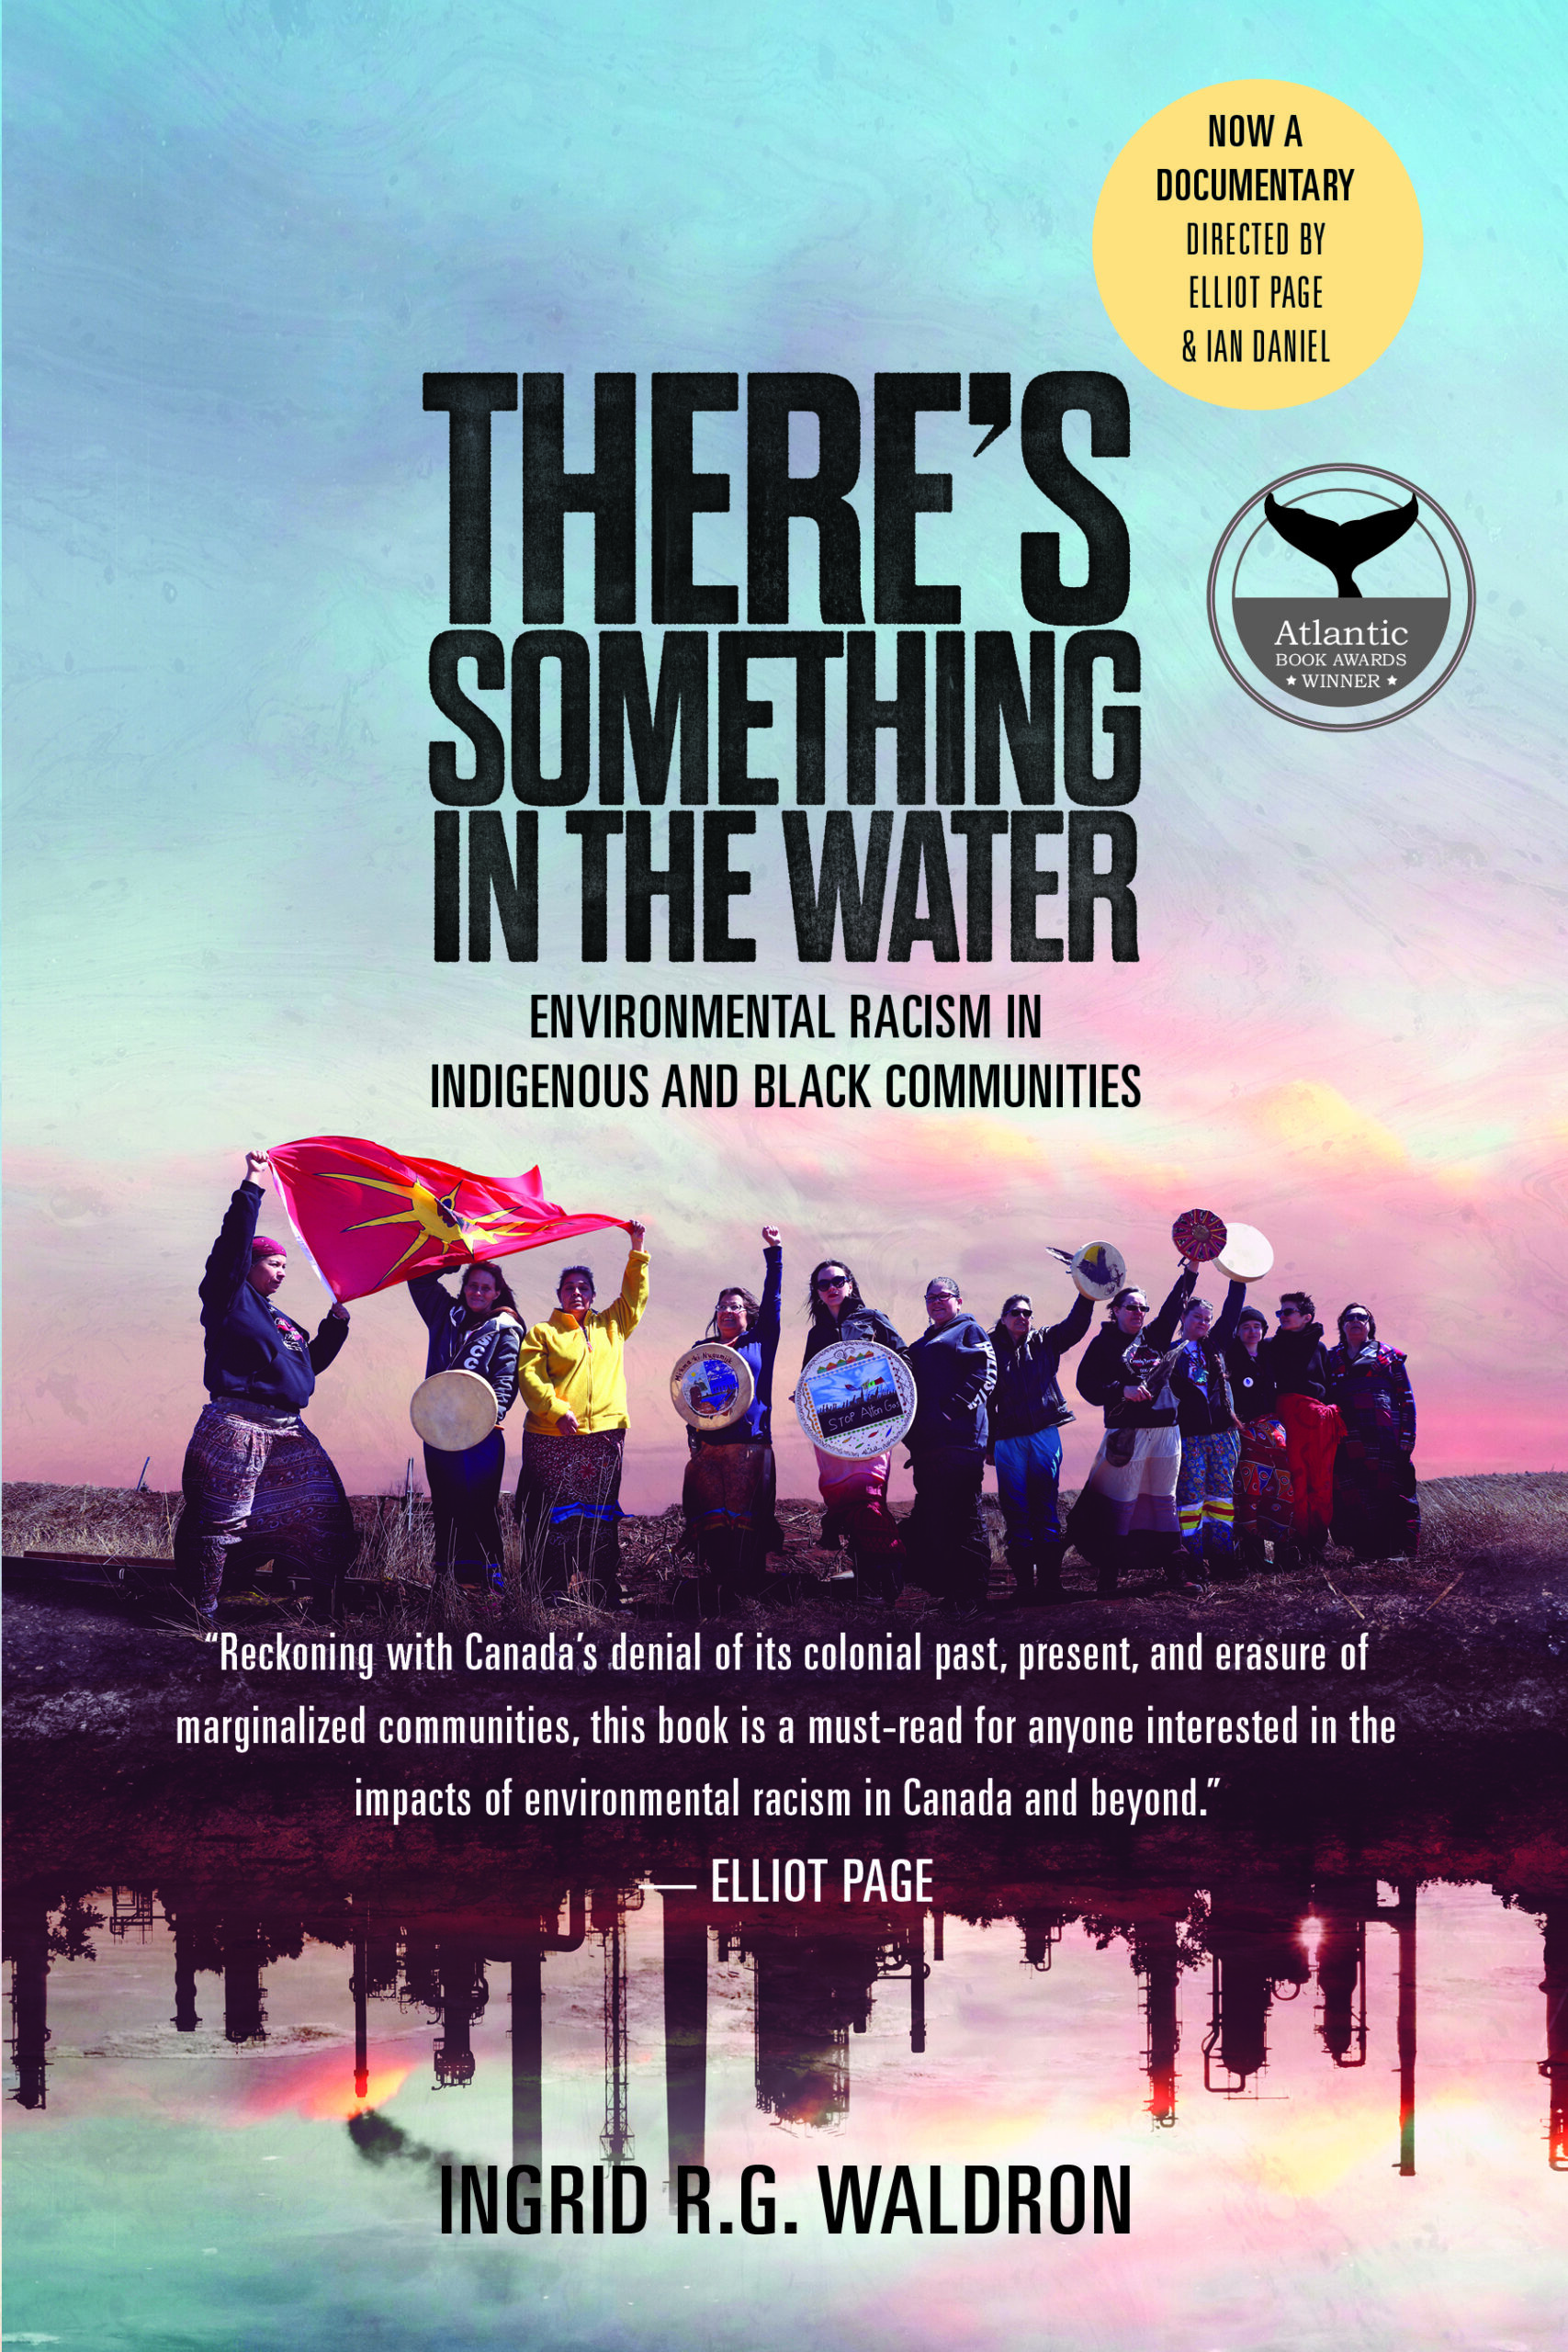 An Interview with Ingrid Waldron, Author of There’s Something in the Water, on Fighting Environmental Racism, and Winning